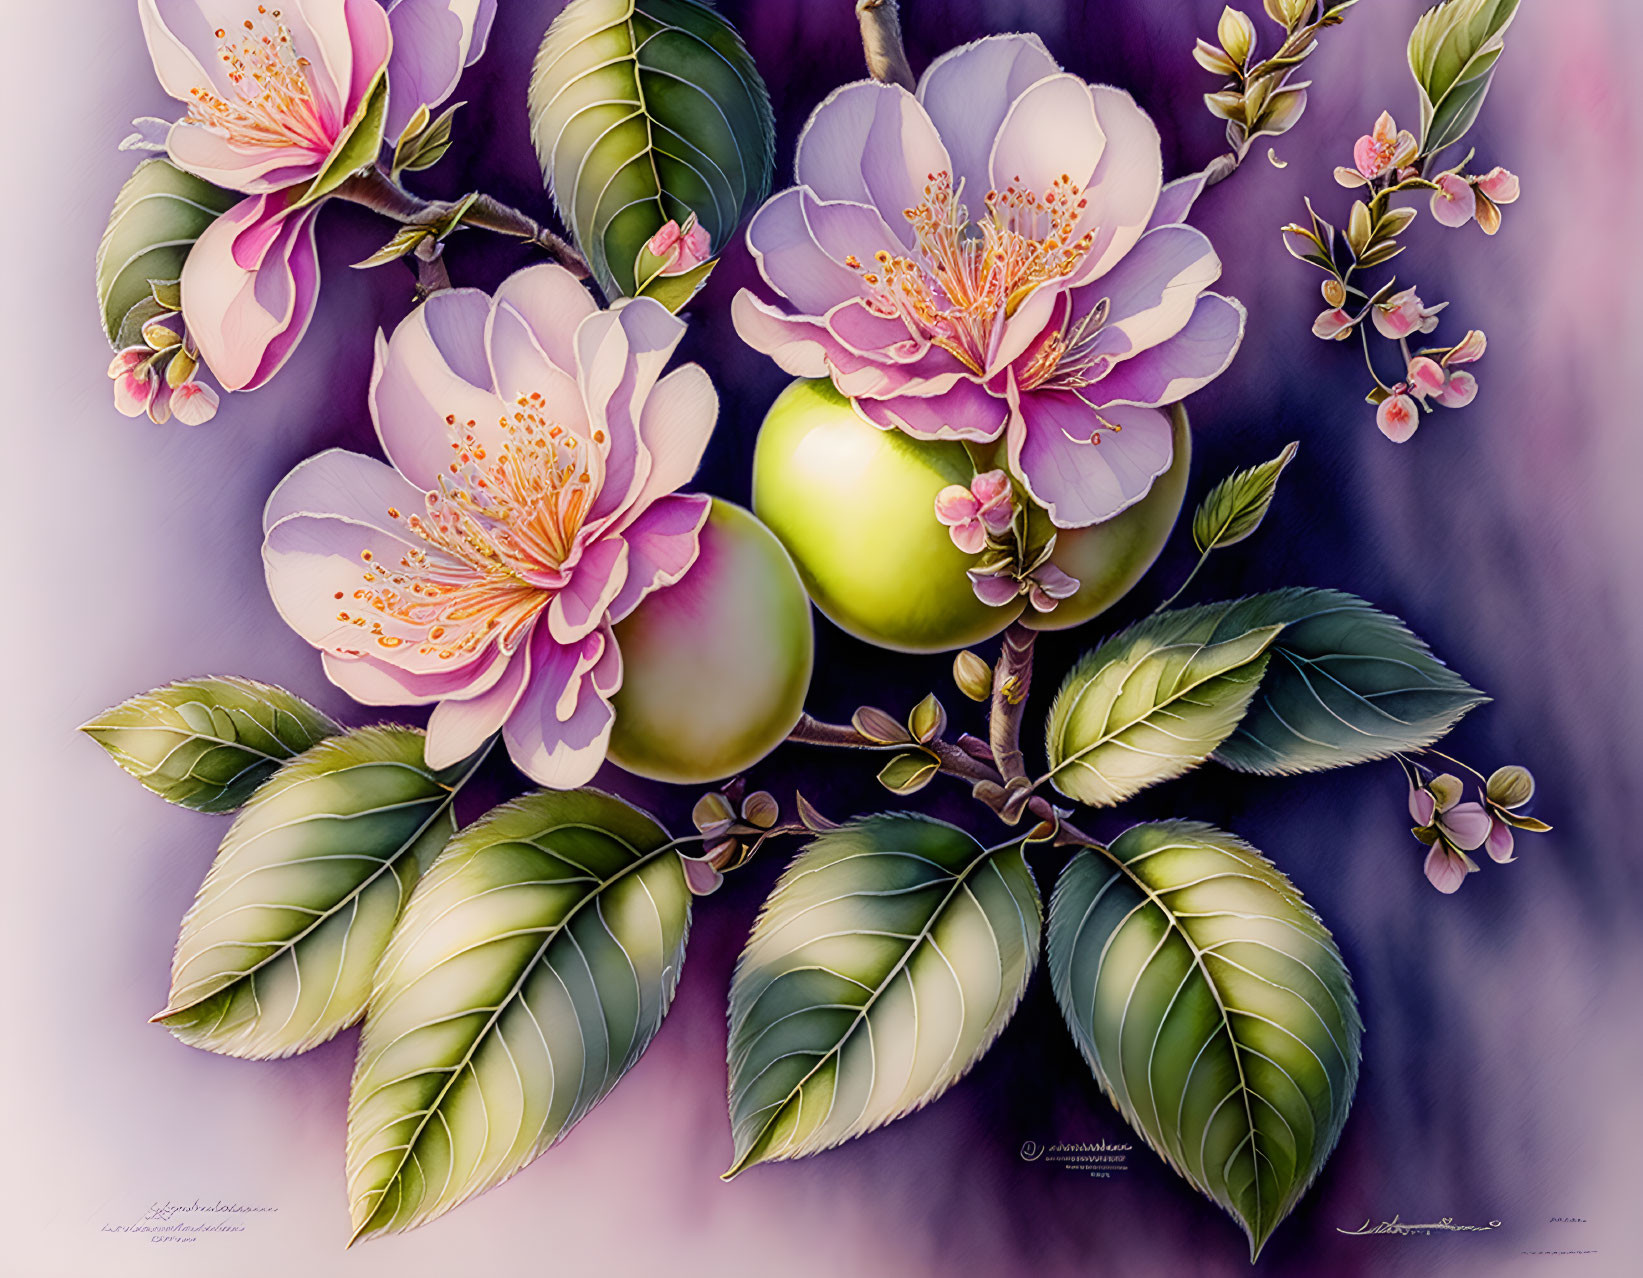 Detailed Illustration of Apple Blossoms, Green Apple, and Vibrant Leaves on Soft Purple Background